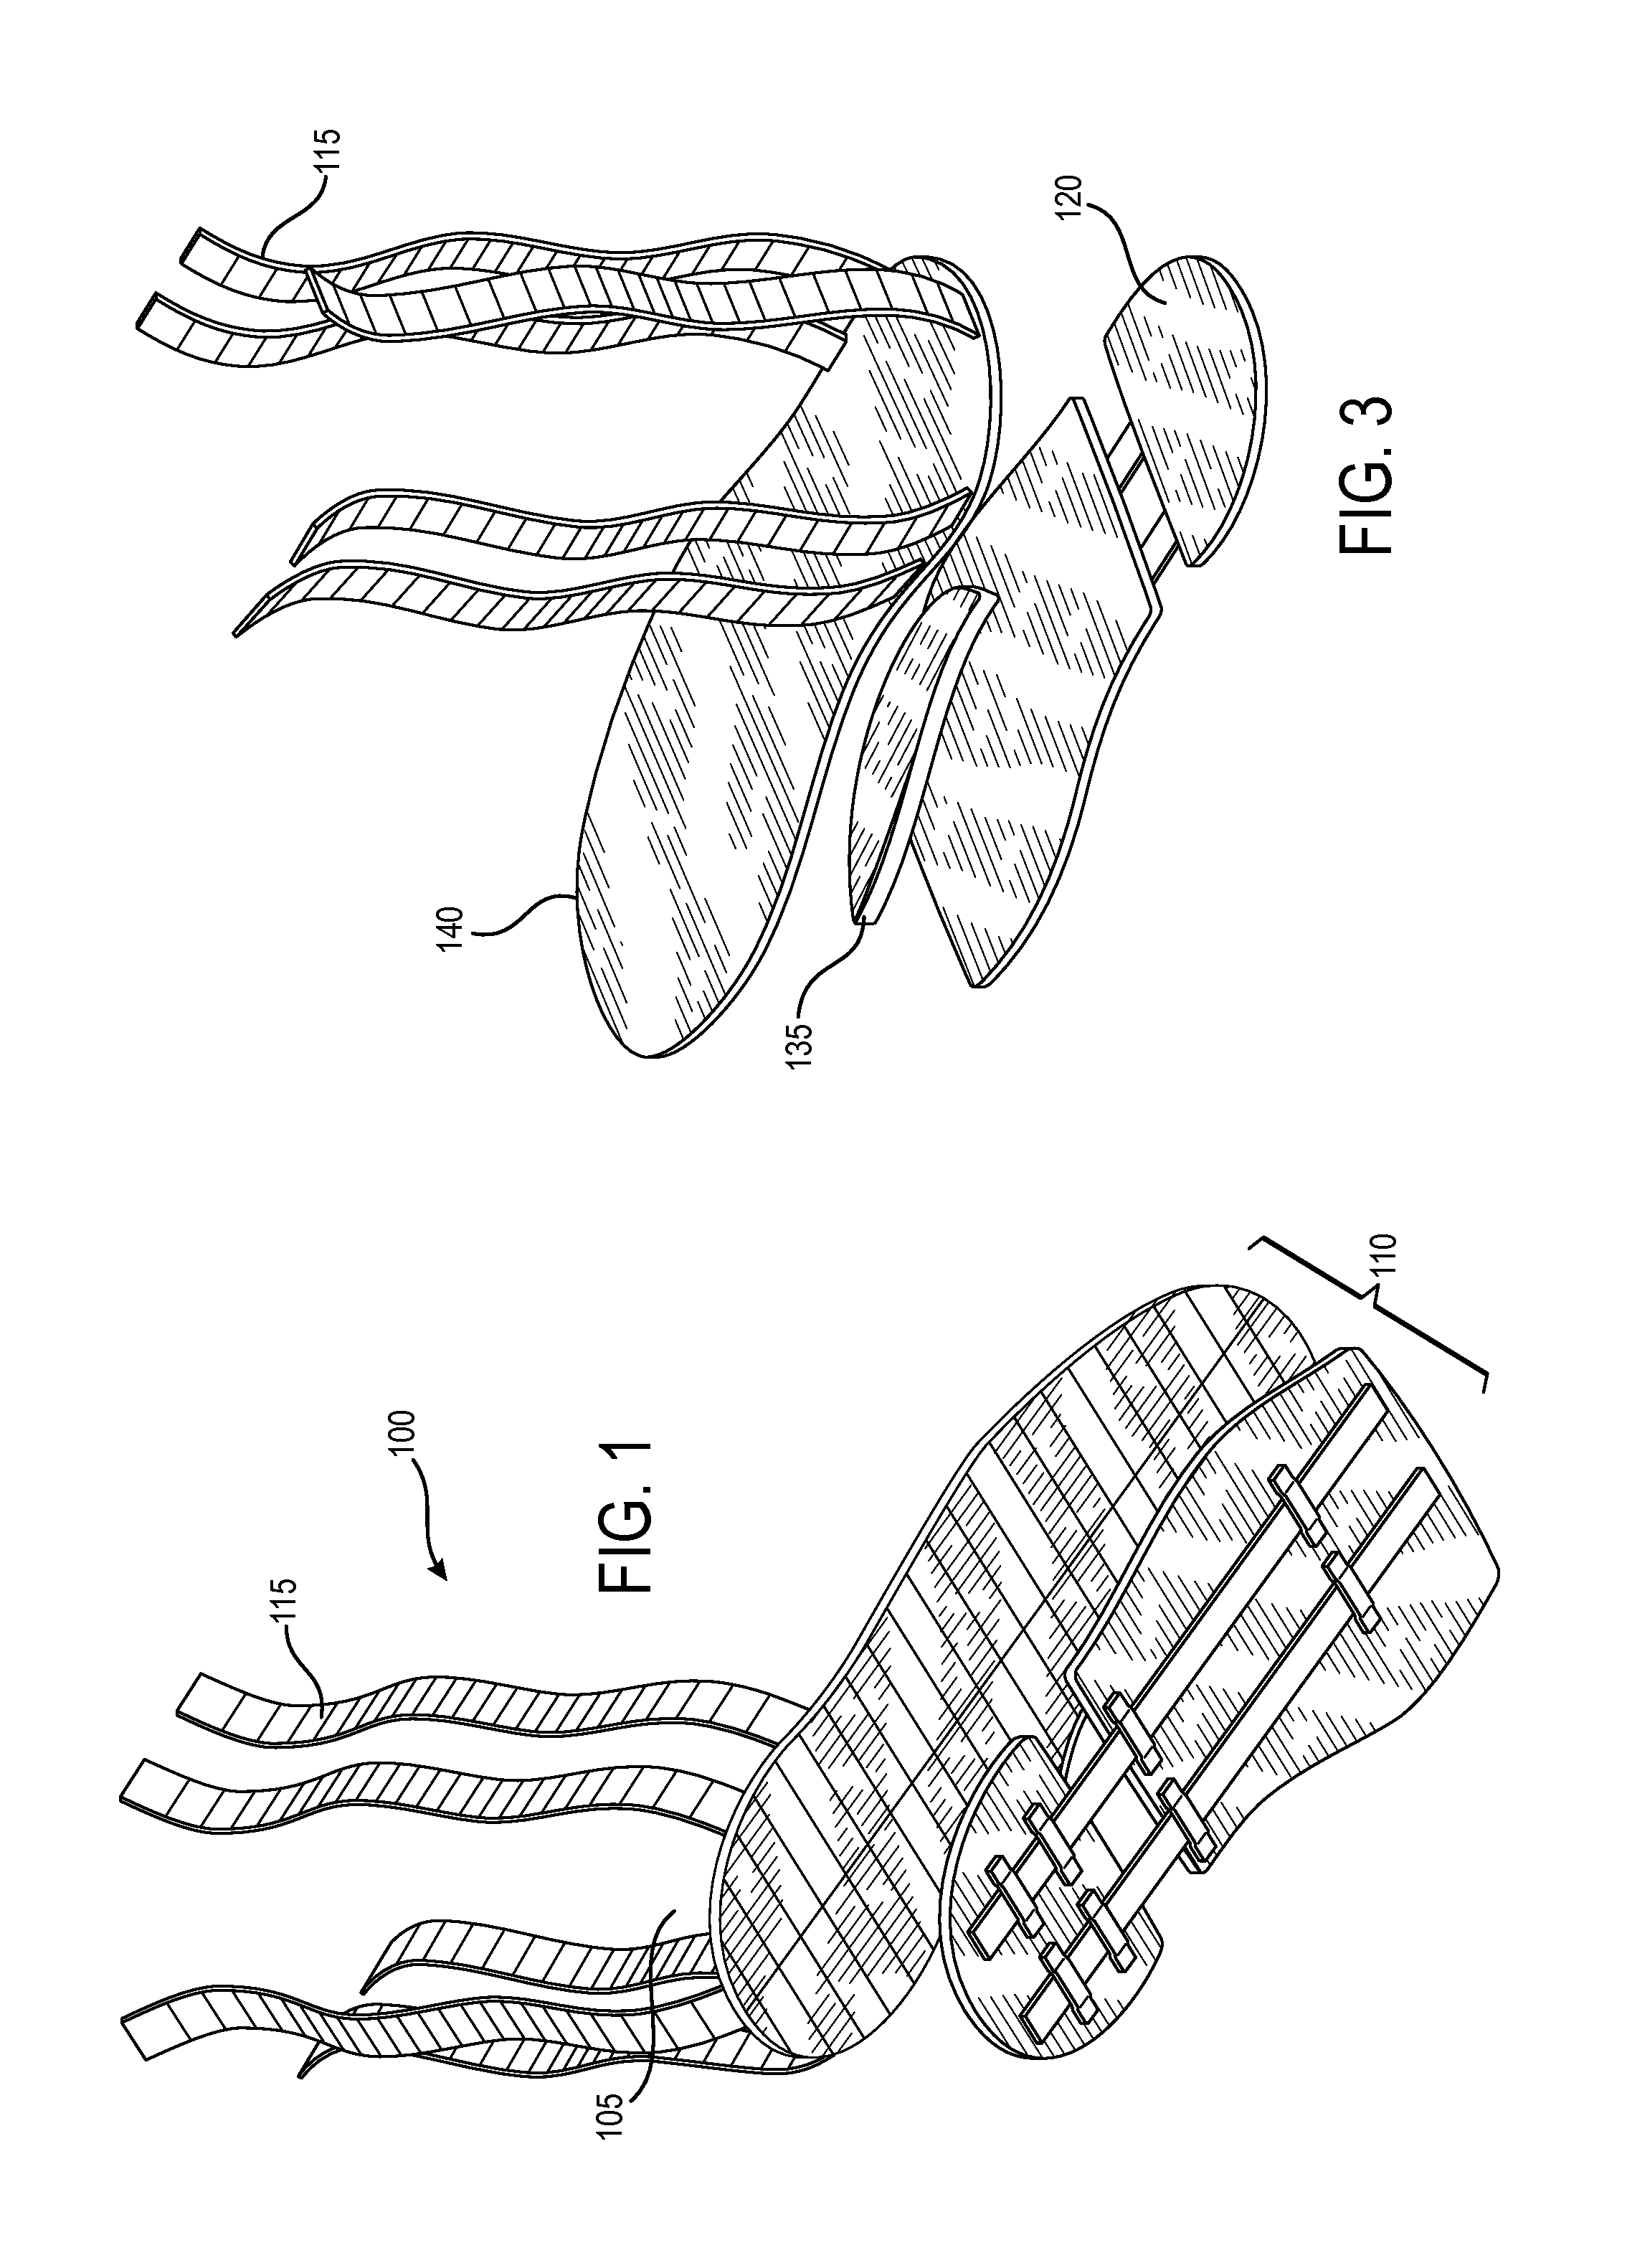 Ankle brace and method of using same